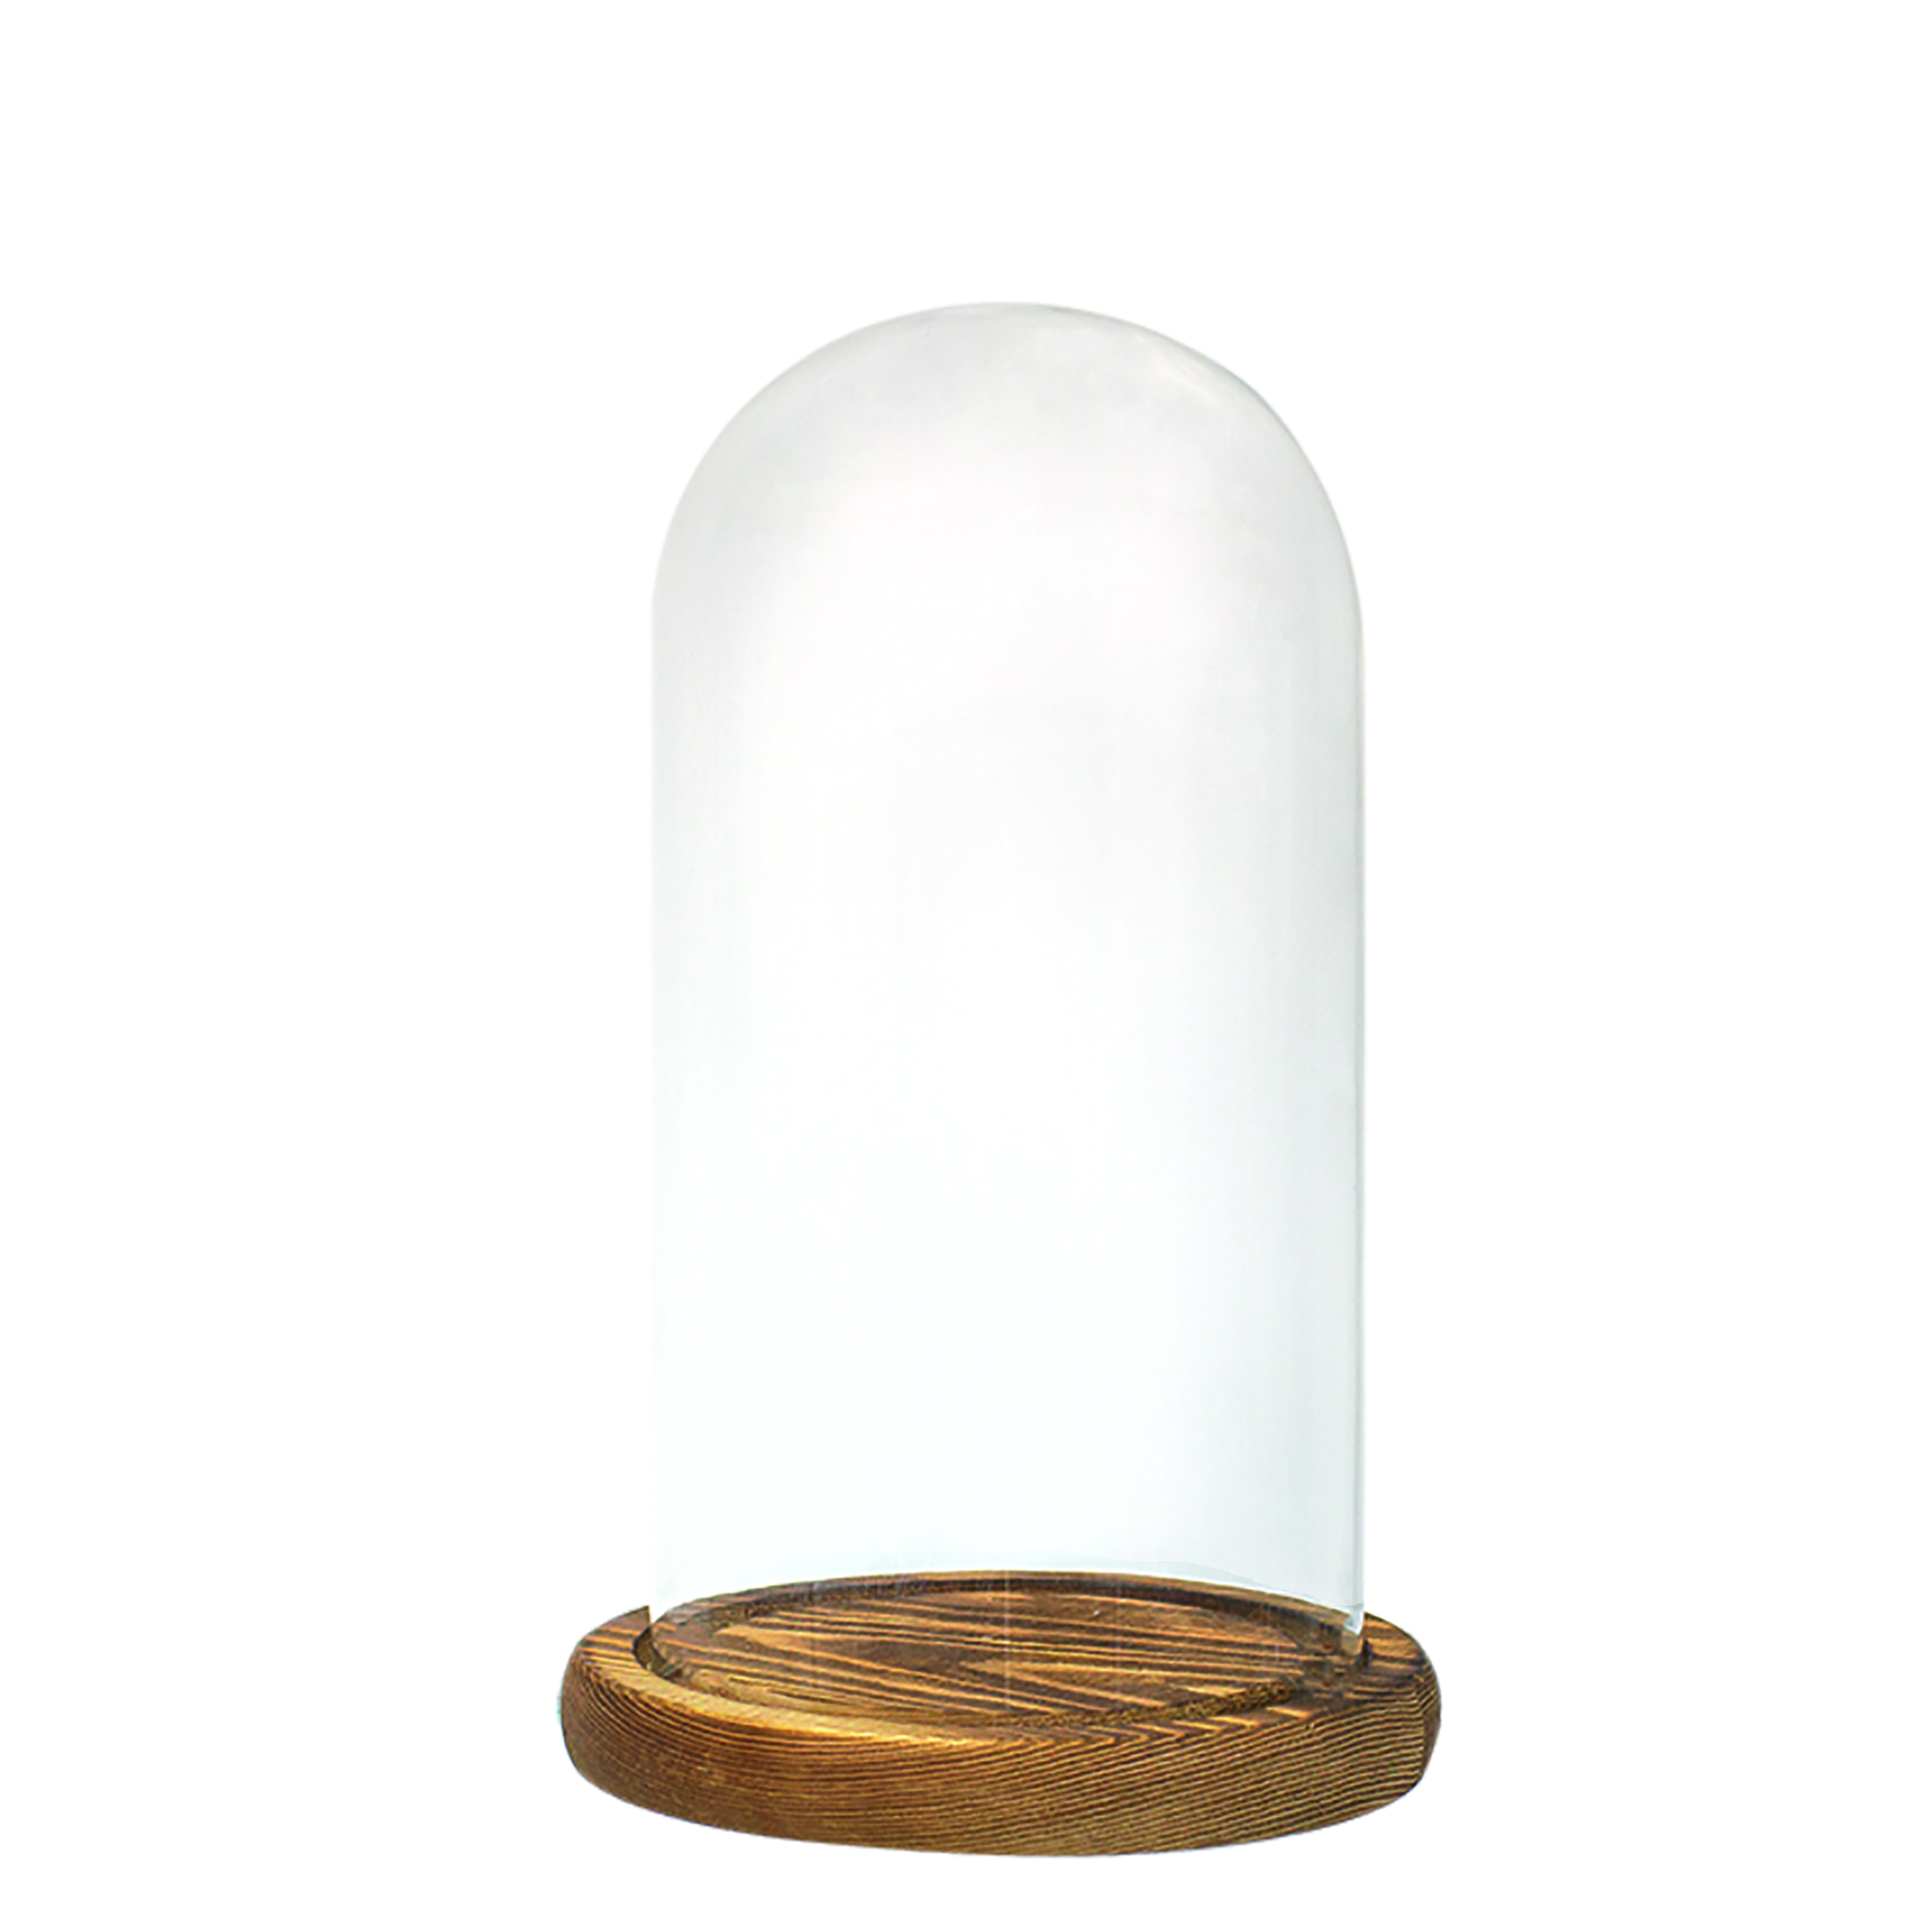 Glass Dome with Wood Base 8½"